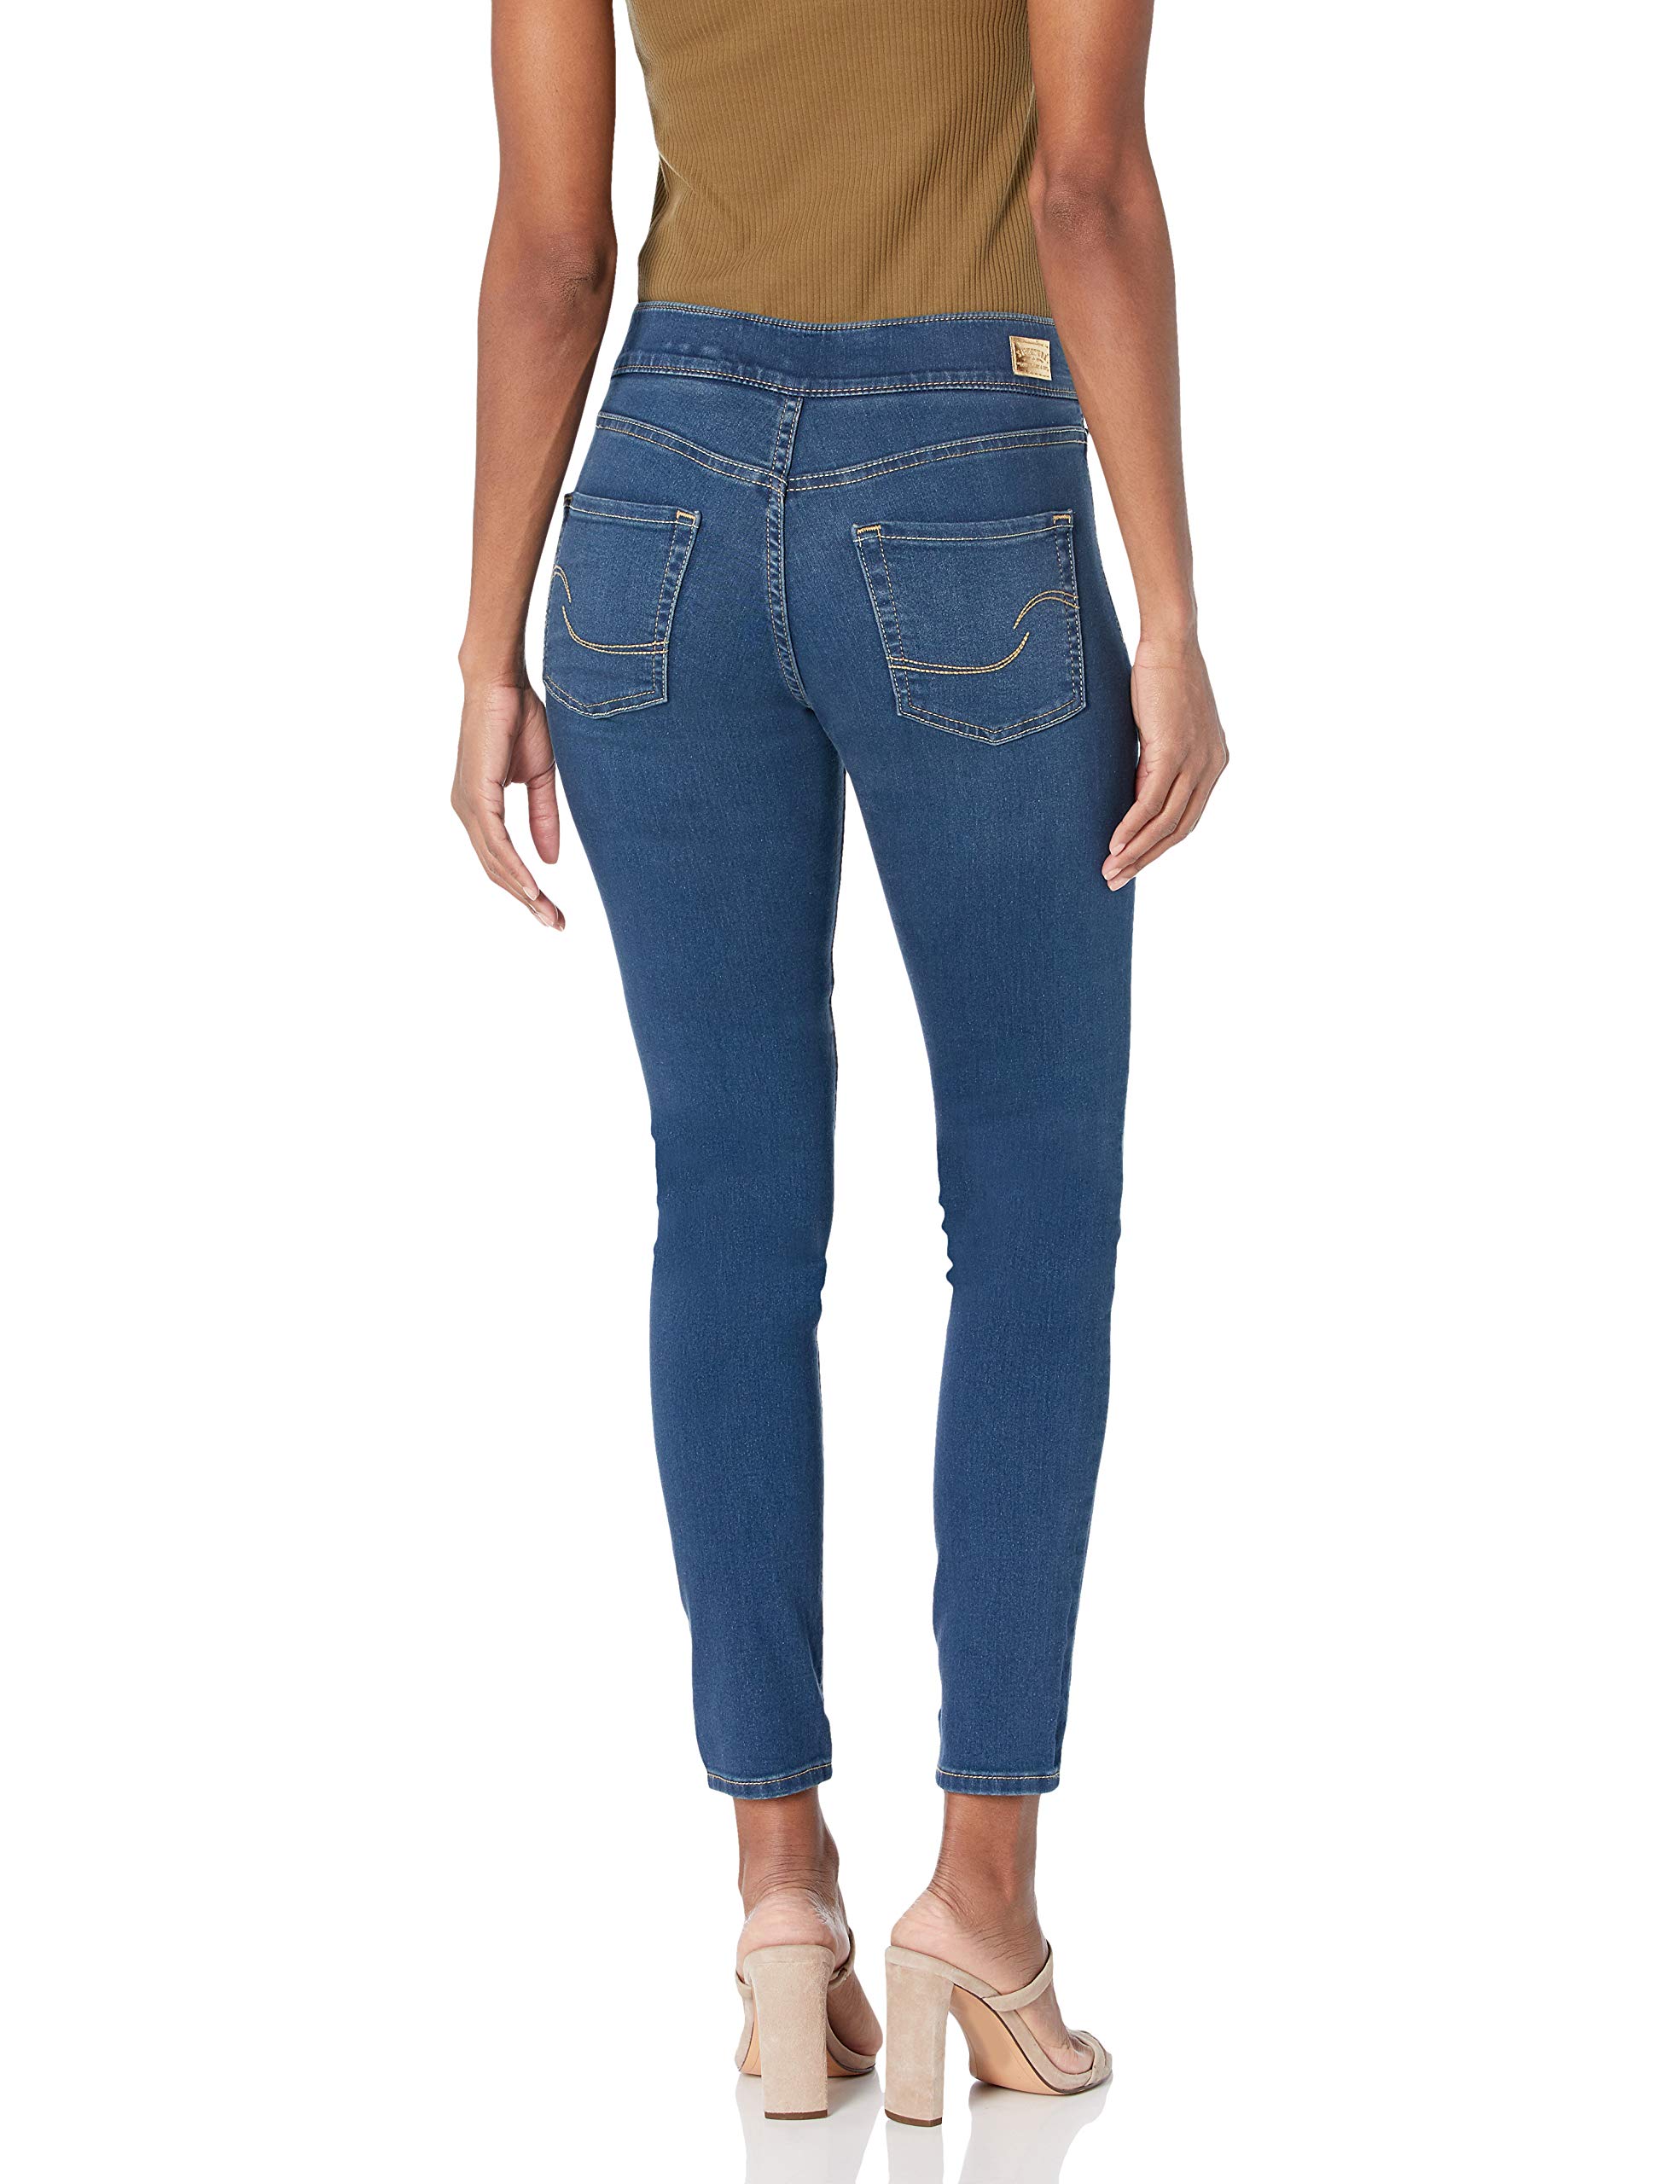 Mua Signature by Levi Strauss & Co. Gold Label Women's Totally Shaping Pull-On  Skinny Jeans (Standard and Plus) trên Amazon Mỹ chính hãng 2023 |  Giaonhan247